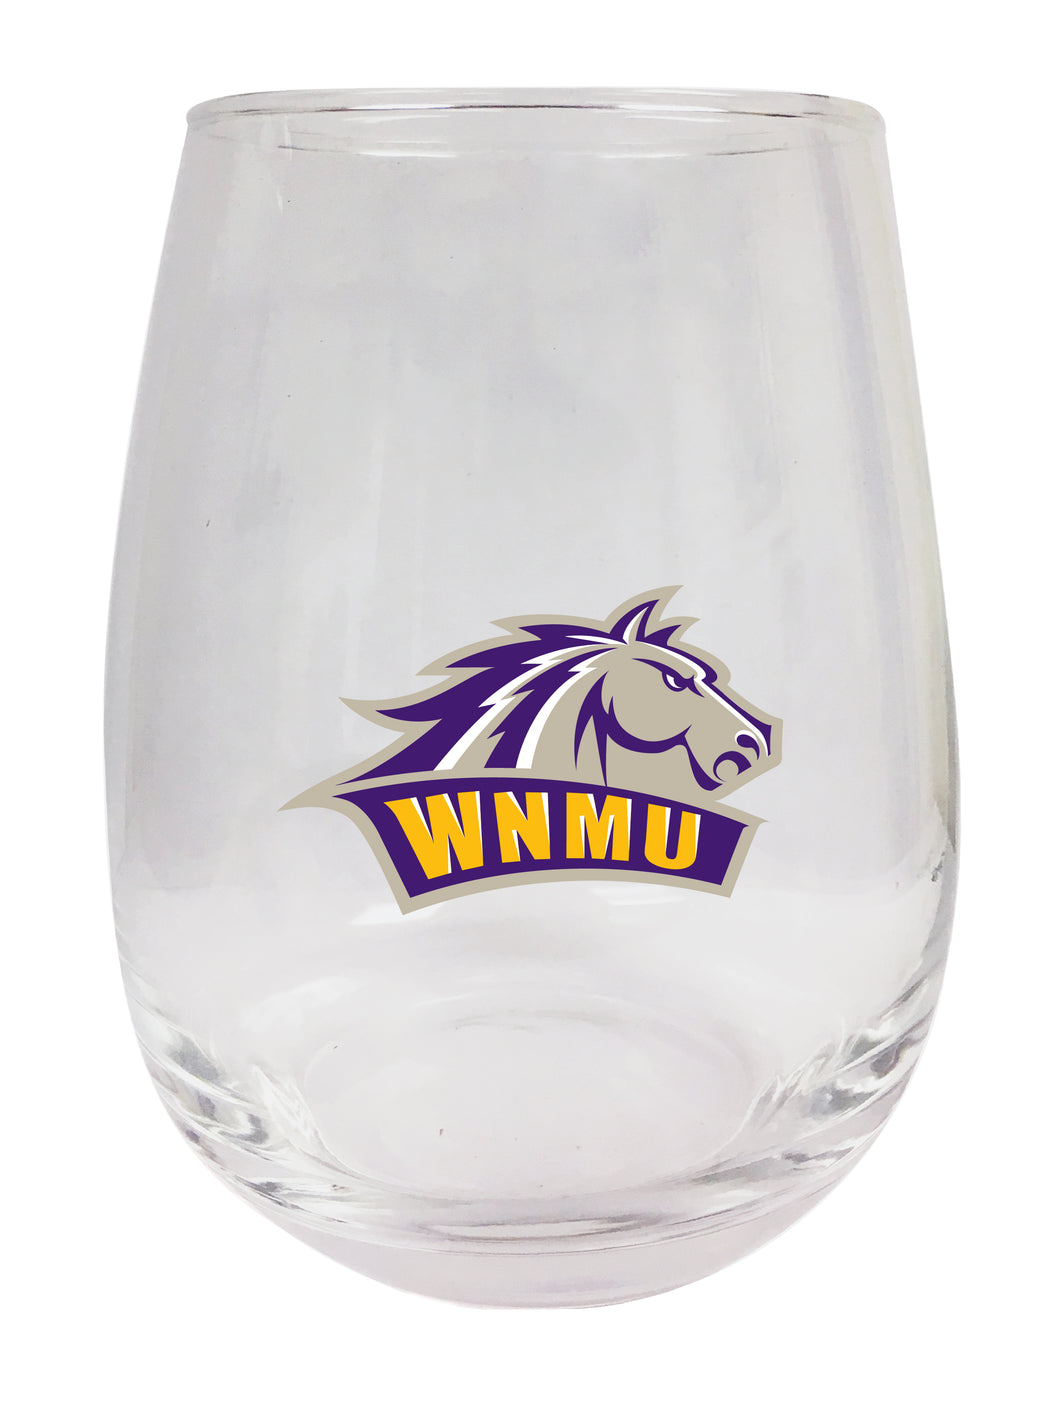 Western New Mexico University Stemless Wine Glass - 9 oz. | Officially Licensed NCAA Merchandise